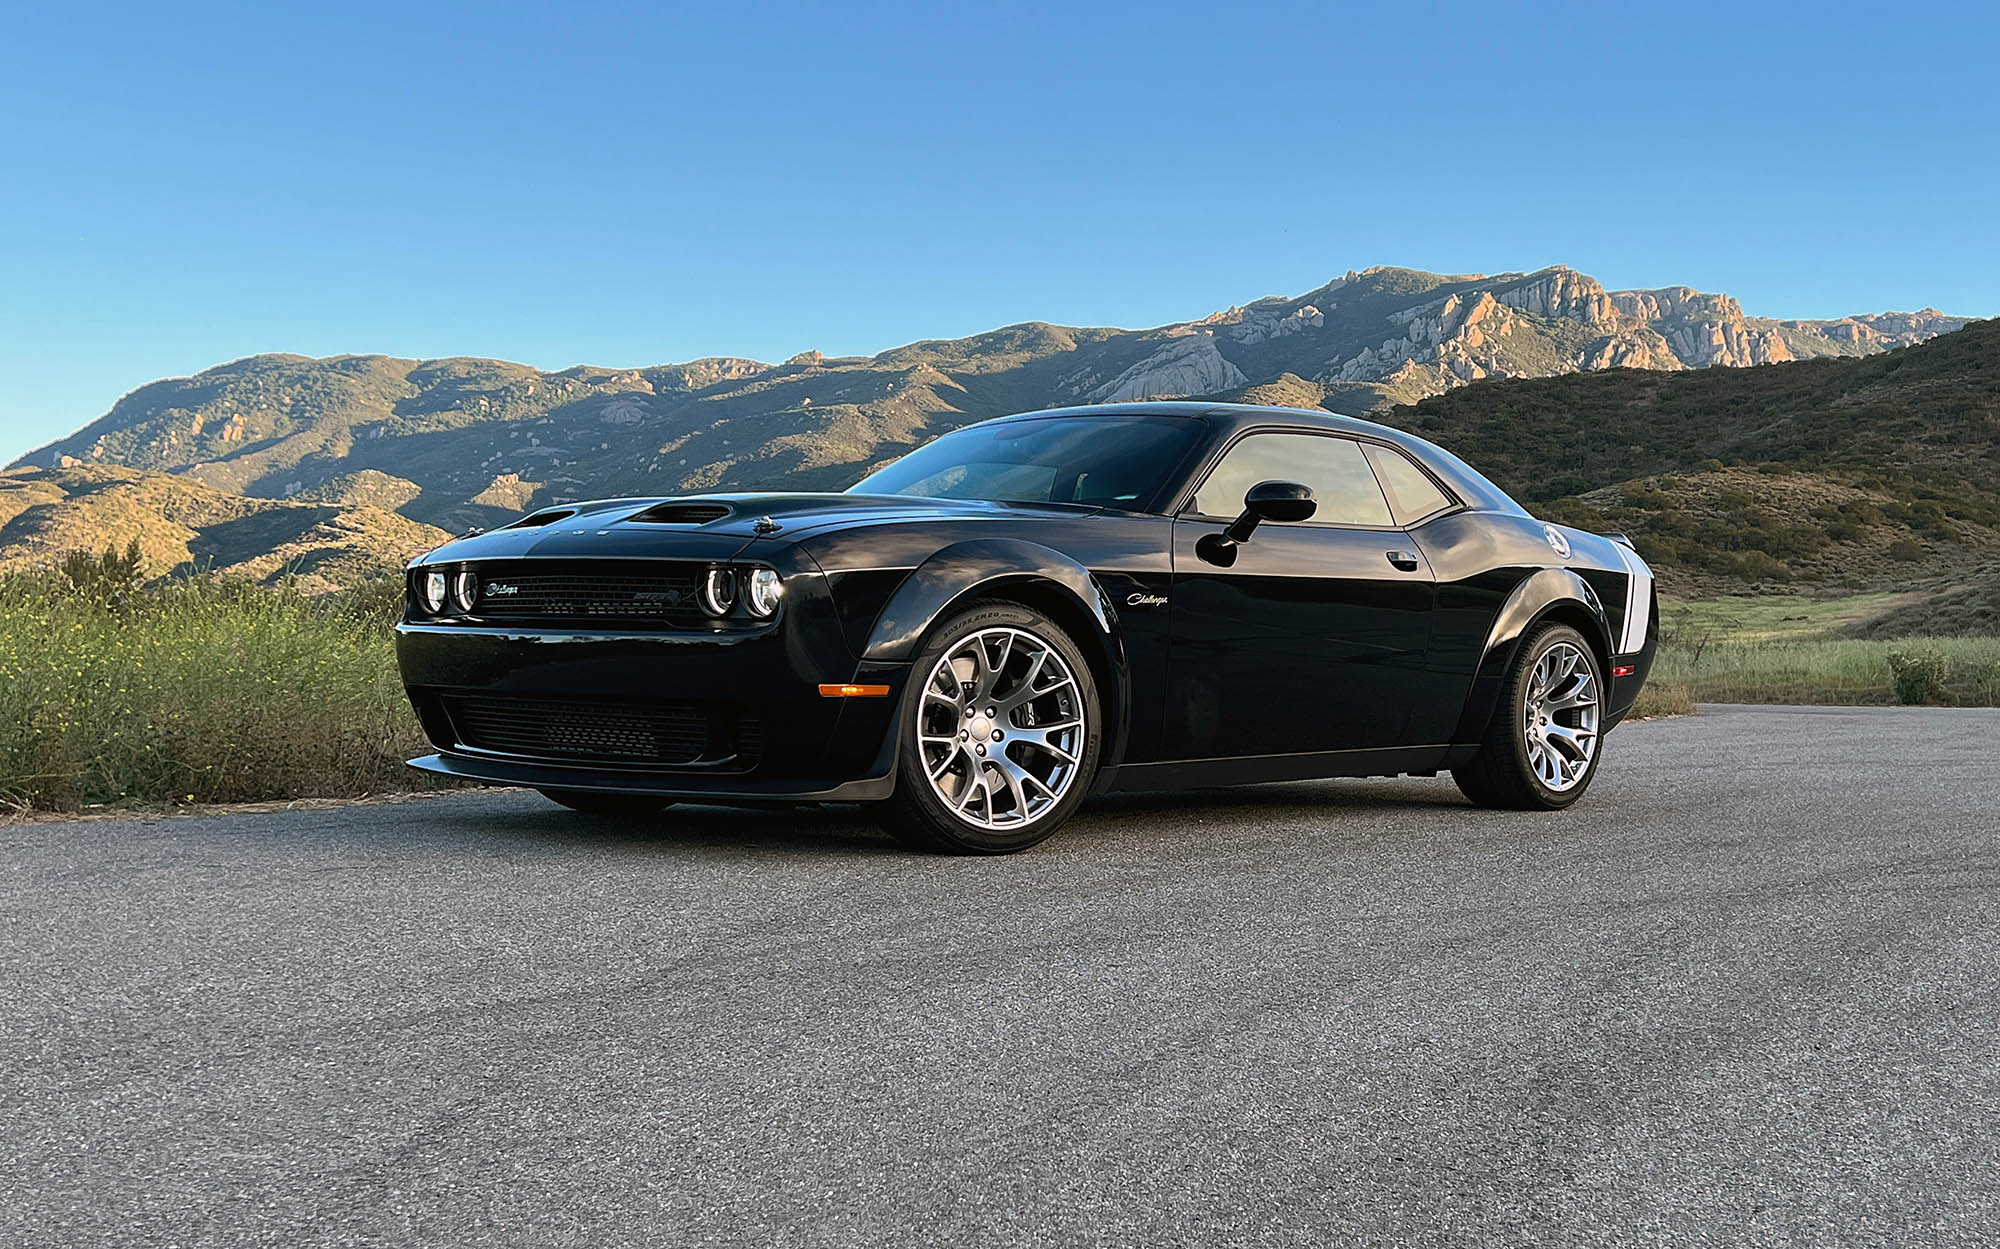 2023 Dodge Challenger Black Ghost front three-quarter view with mountains in the background.